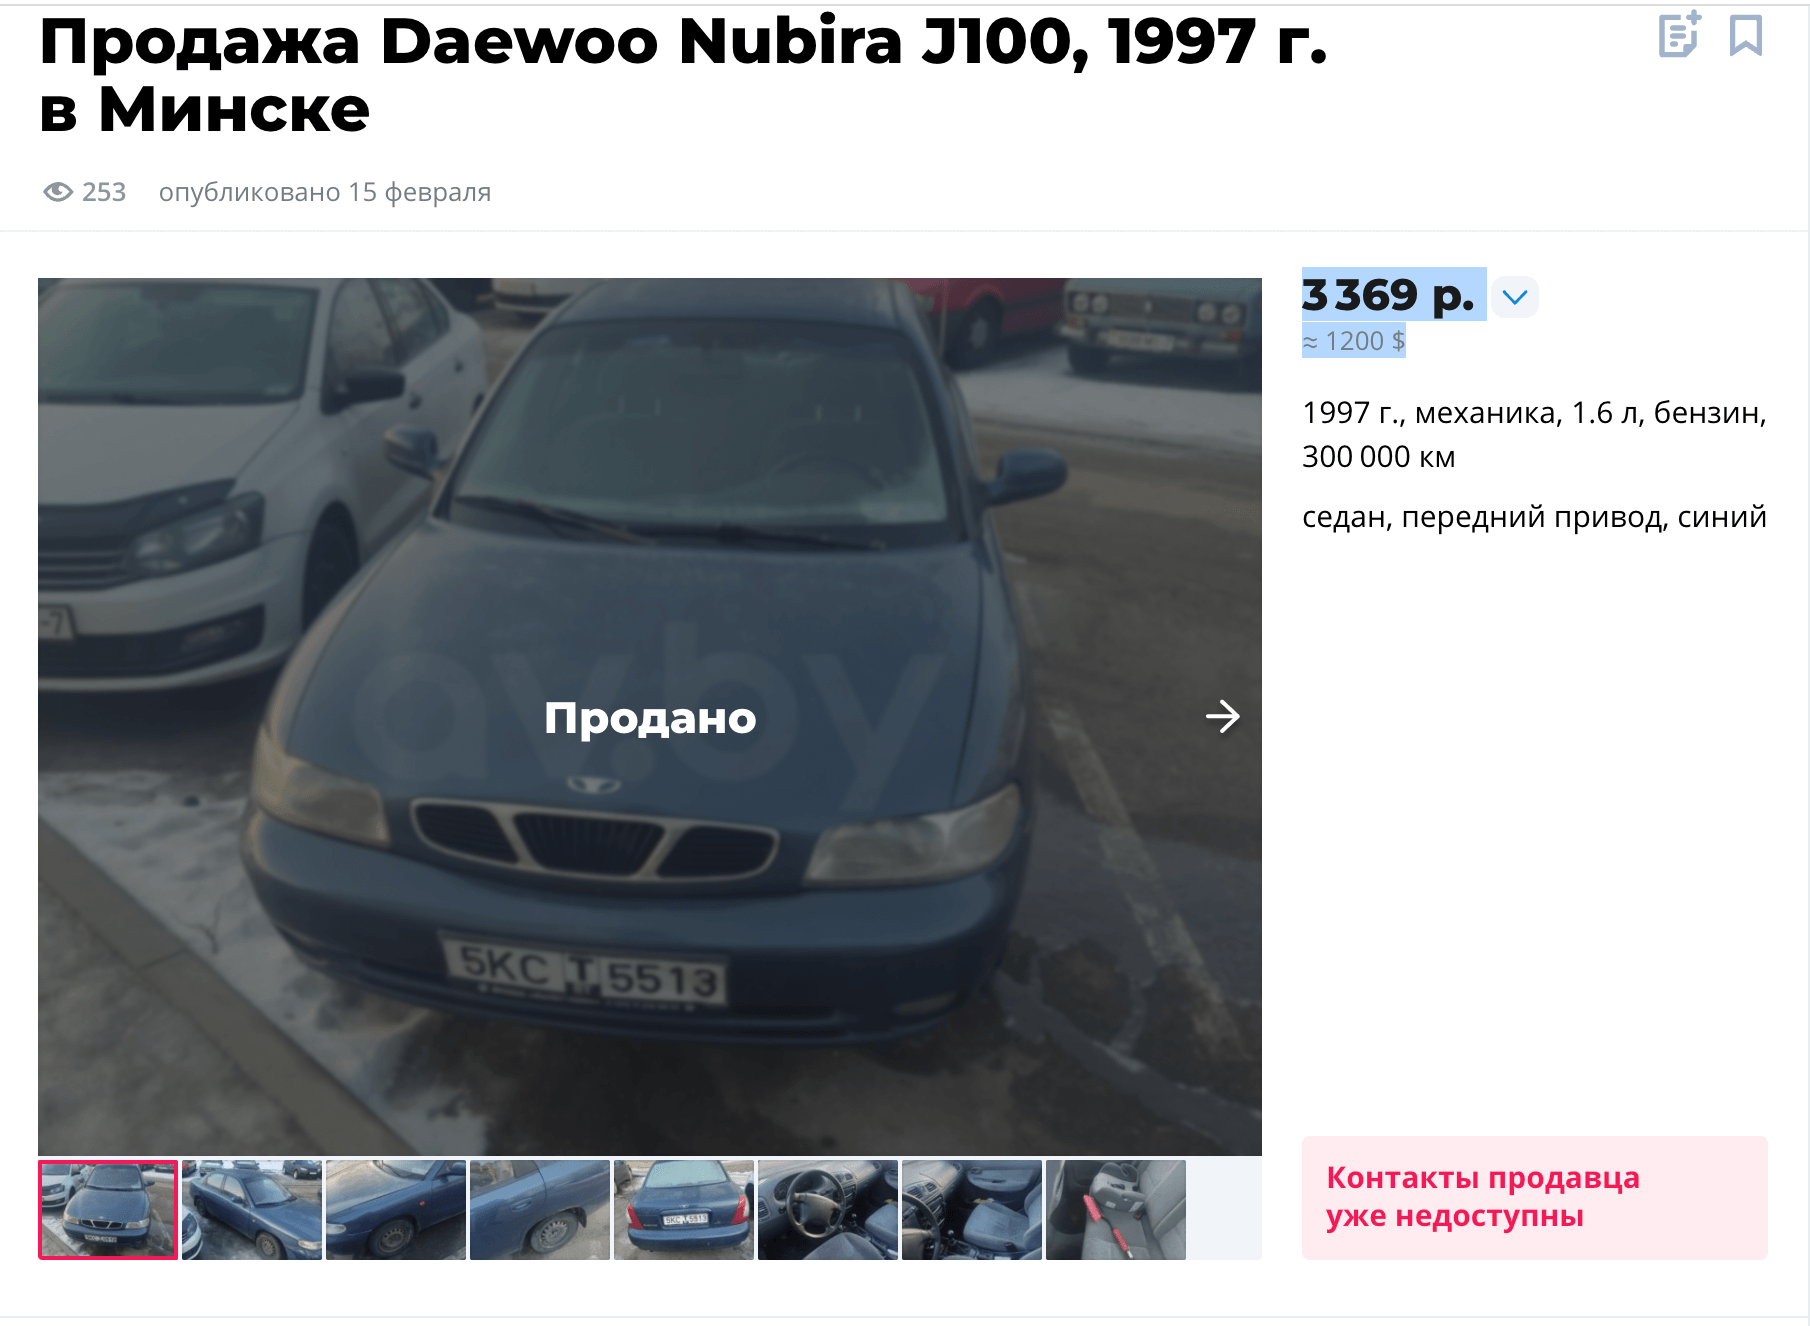 Daewoo Nubira from the wanted poster was sold for $1200